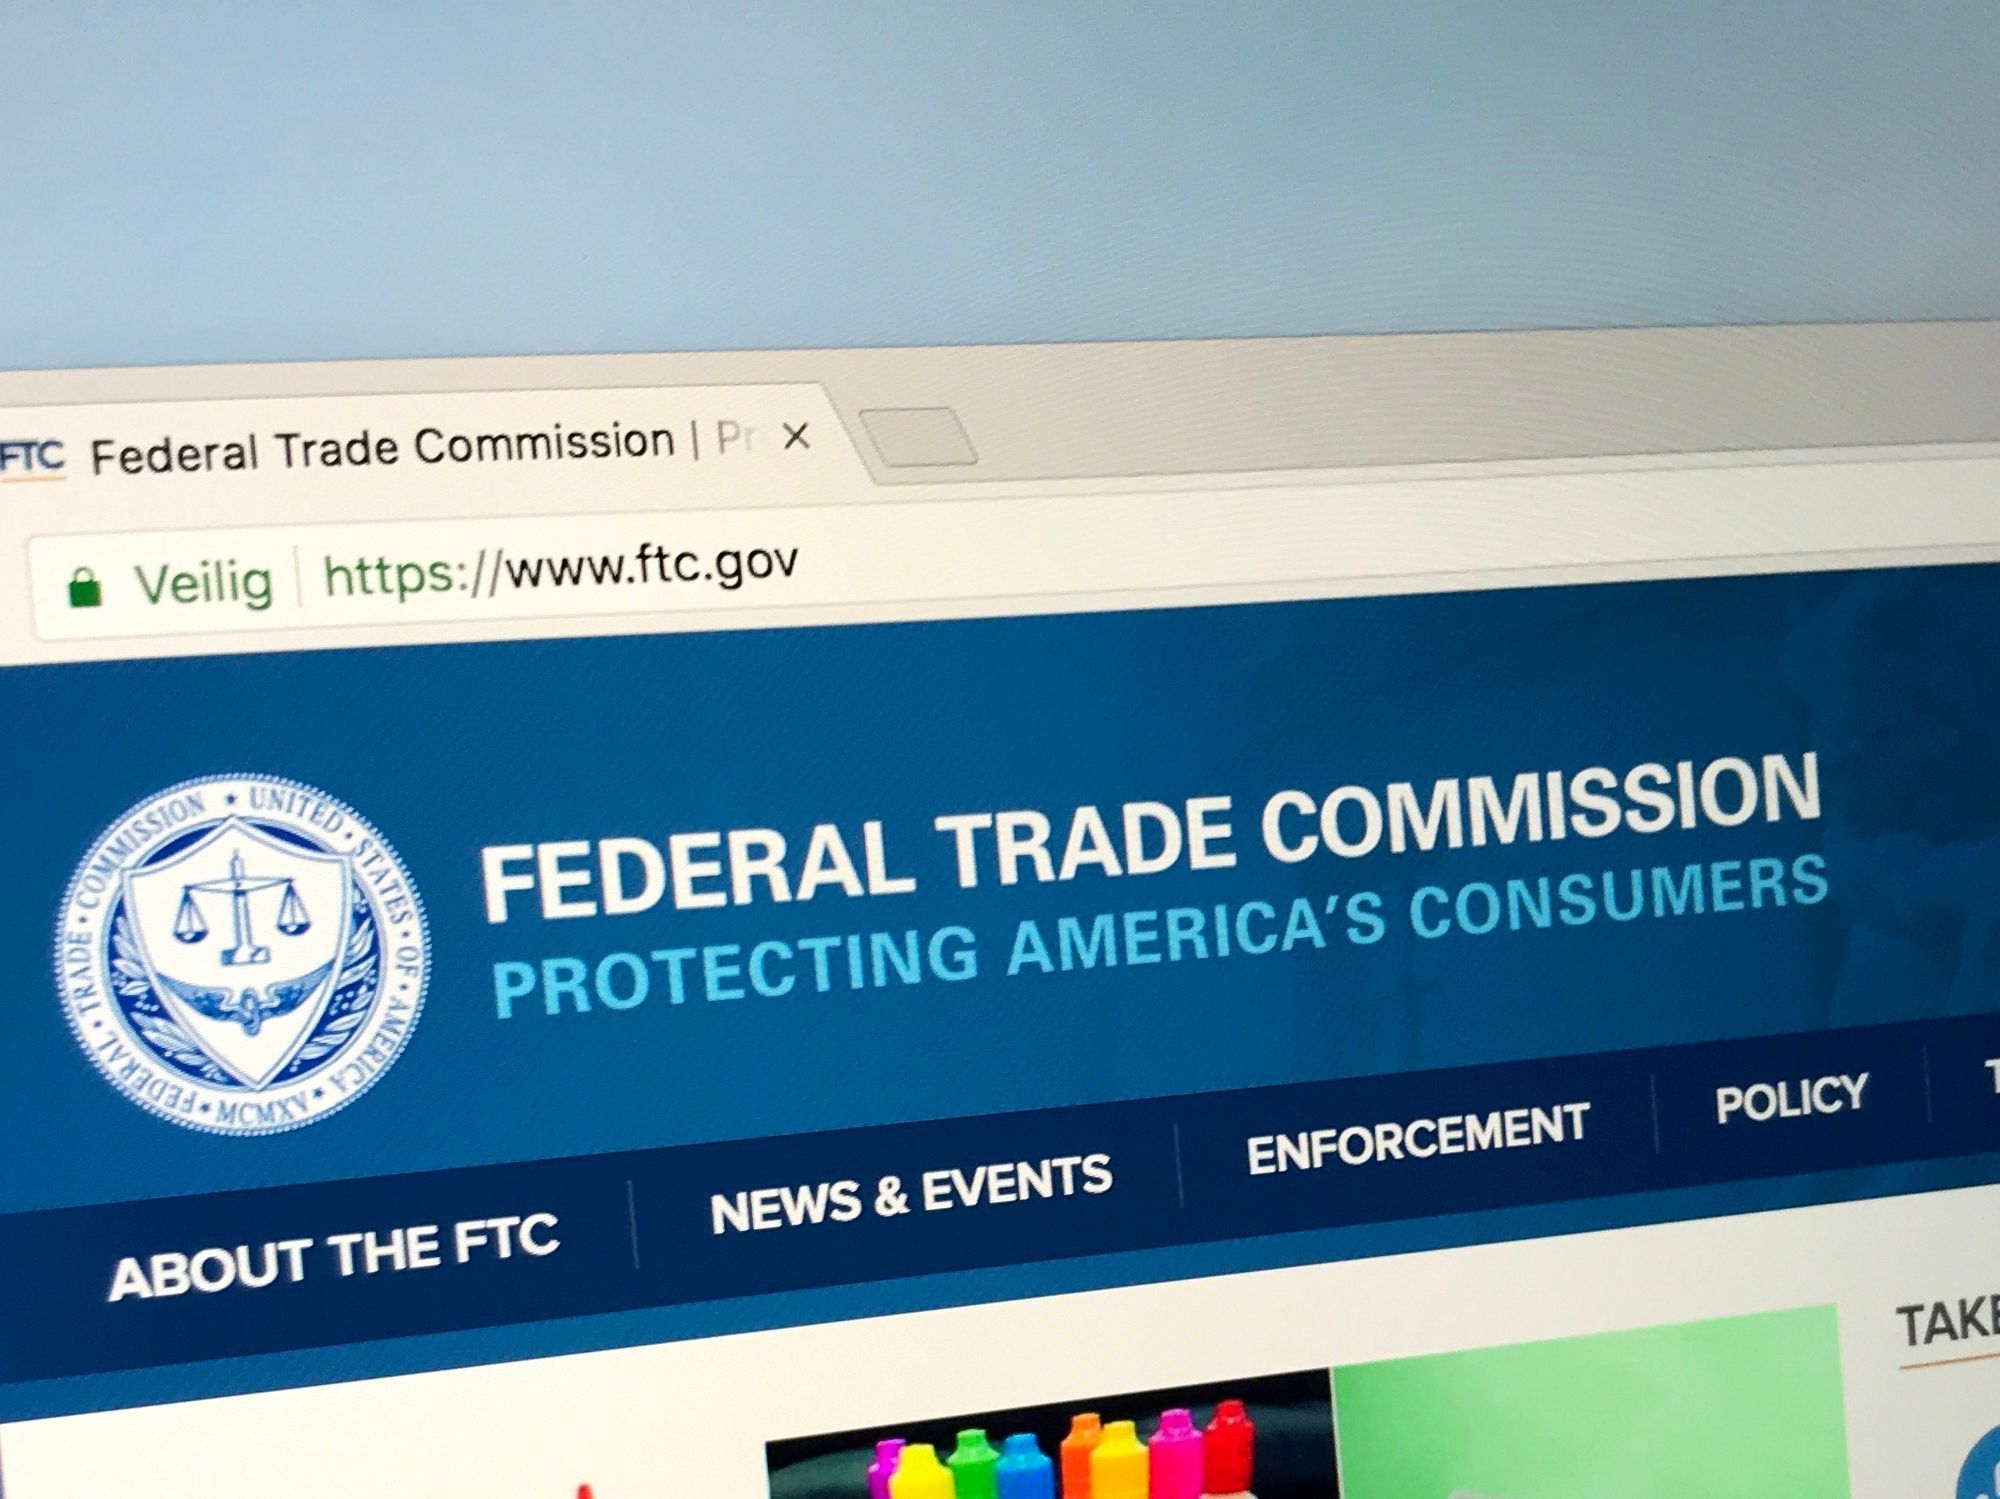 FTC refunds are recovered and distributed by the Federal Trade Commission.